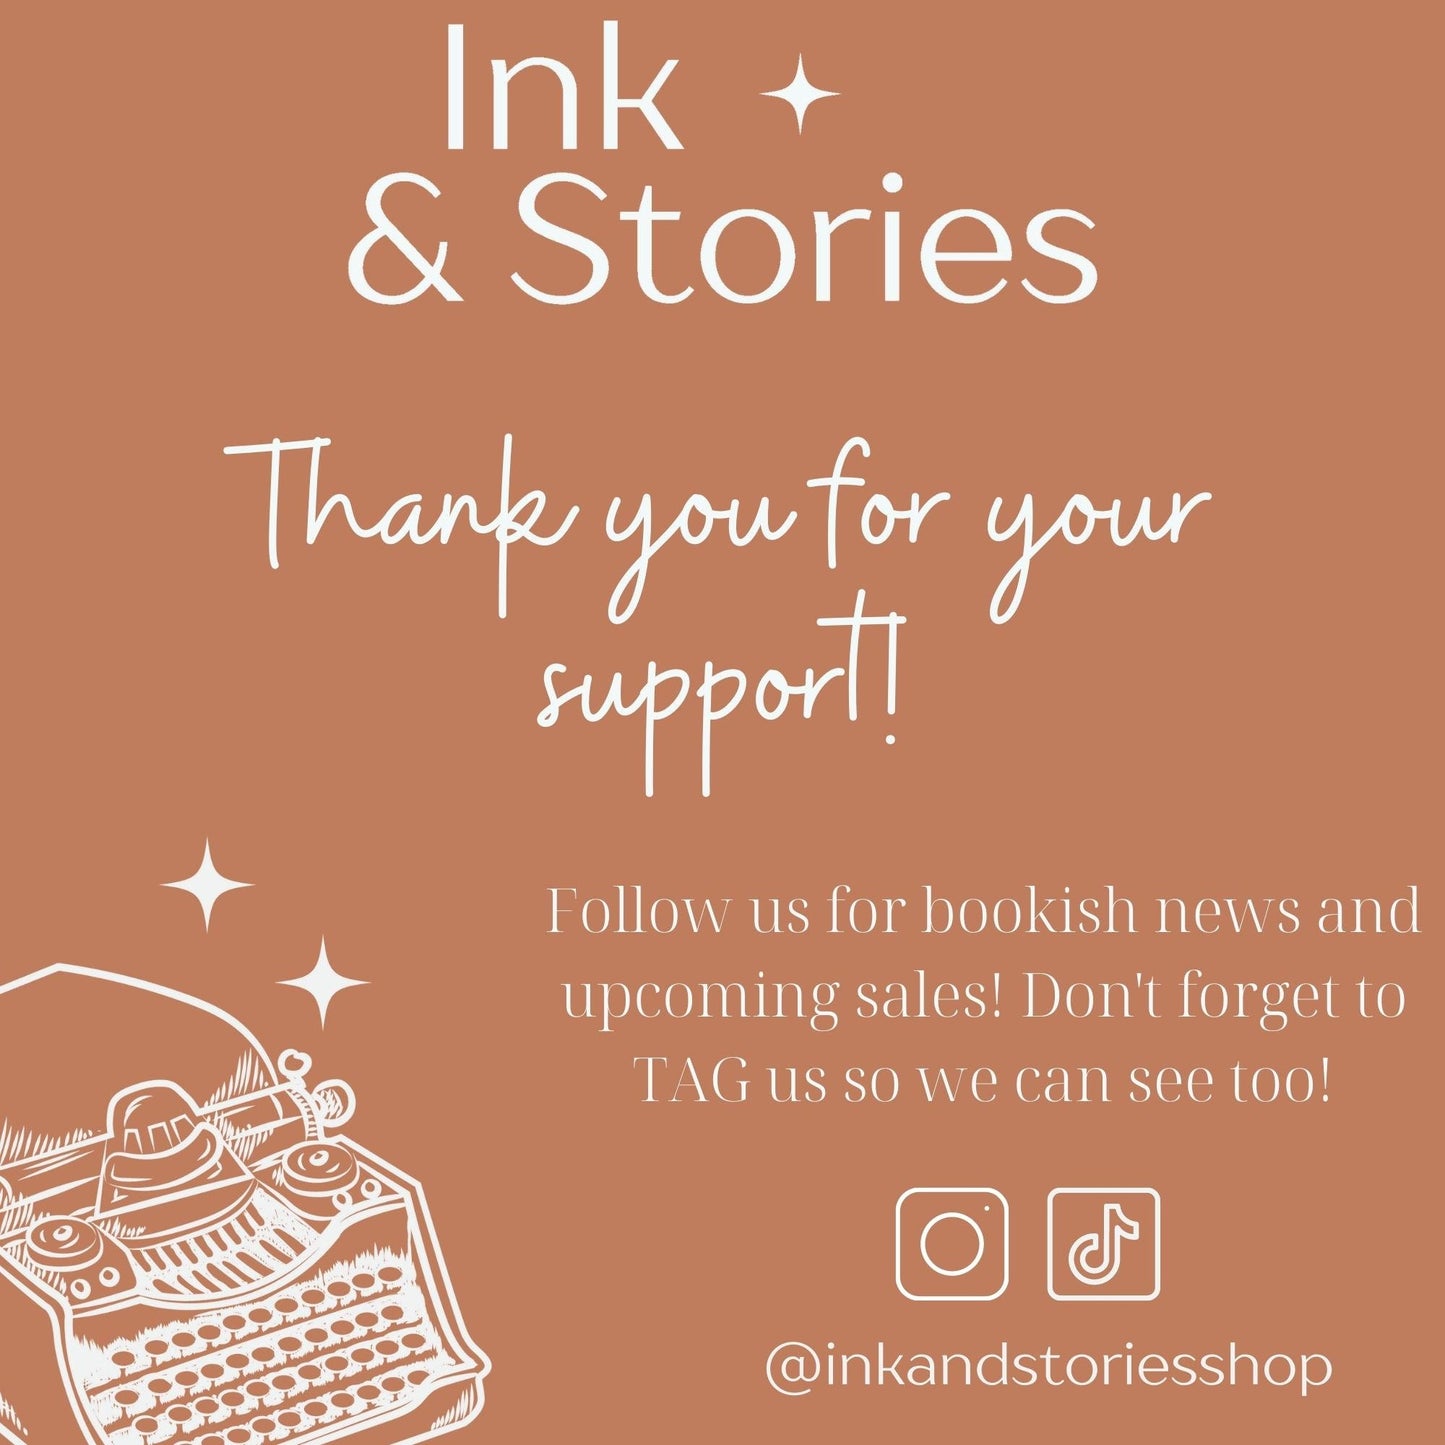 Ink and Stories social media thank you cardf